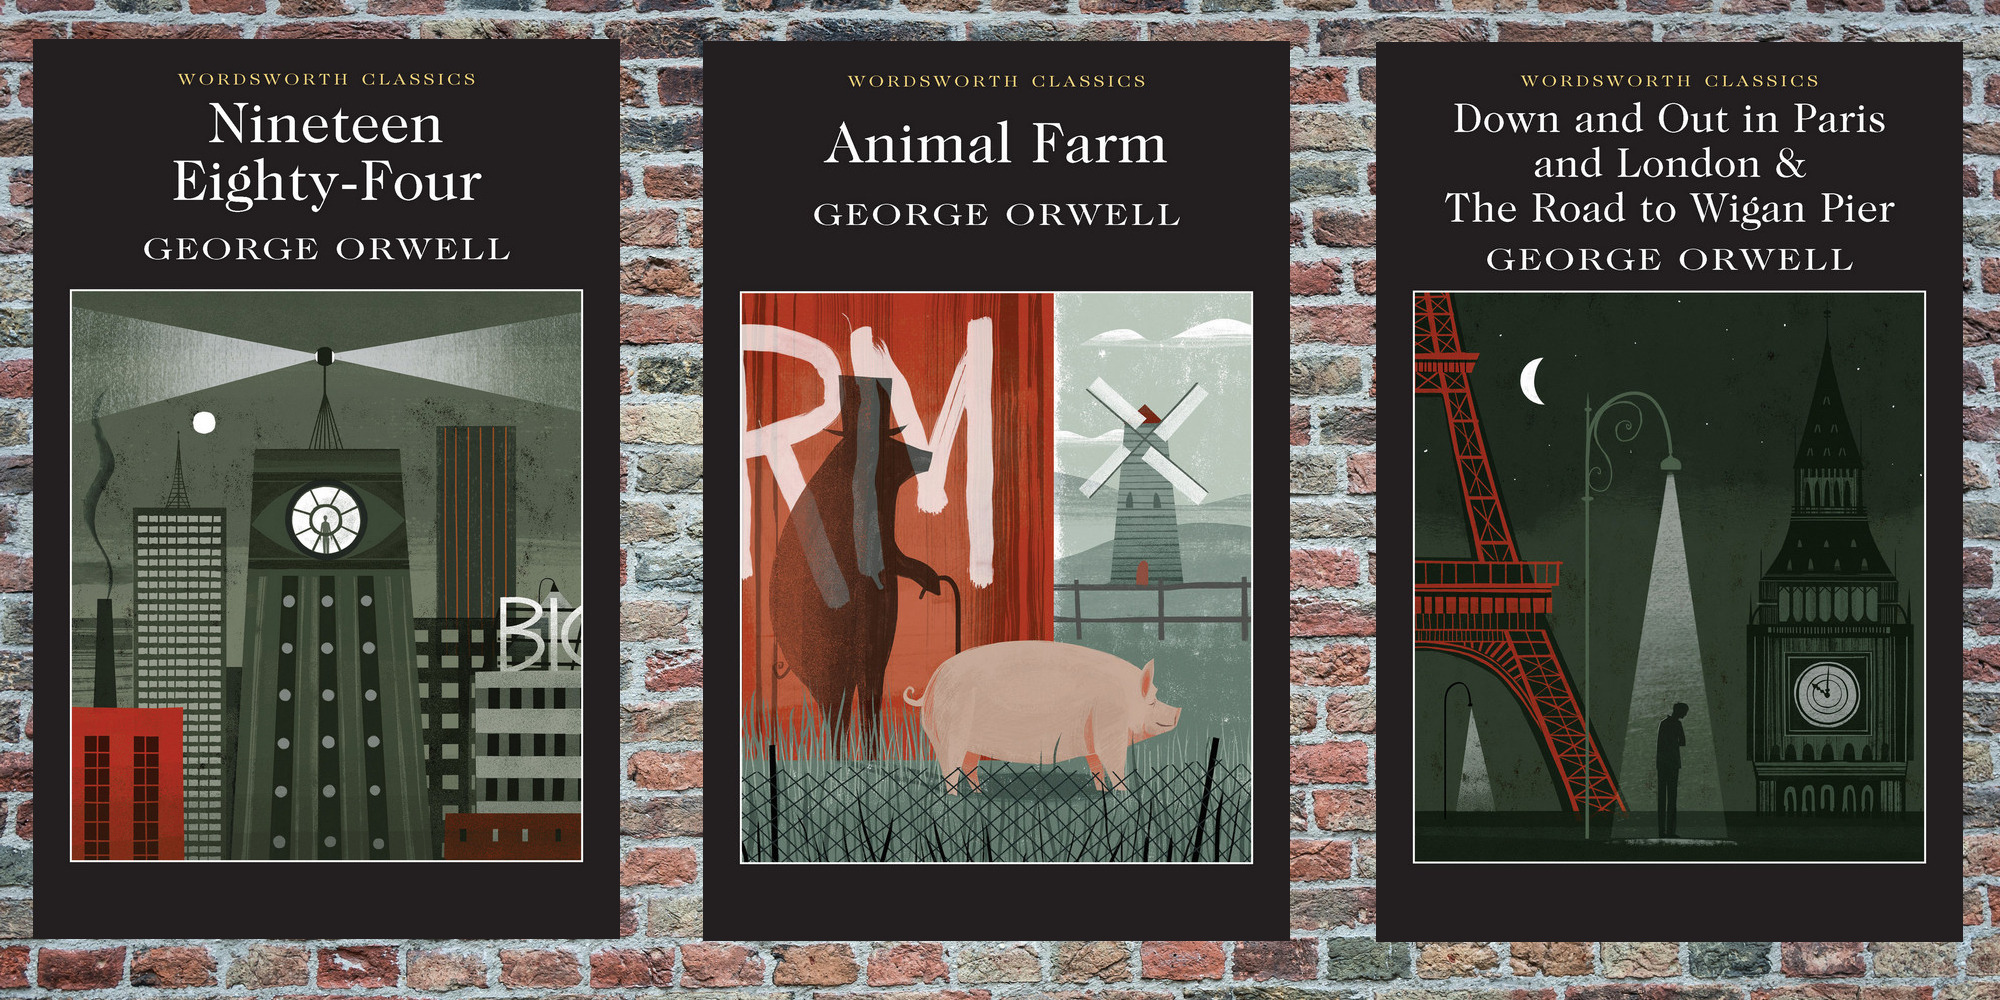 In January 2021, we publish four seminal works by George Orwell: his  fictions, 'Animal Farm' and 'Nineteen Eighty-Four', and his documentary  writings, 'Down and Out in Paris and London', and 'The Road